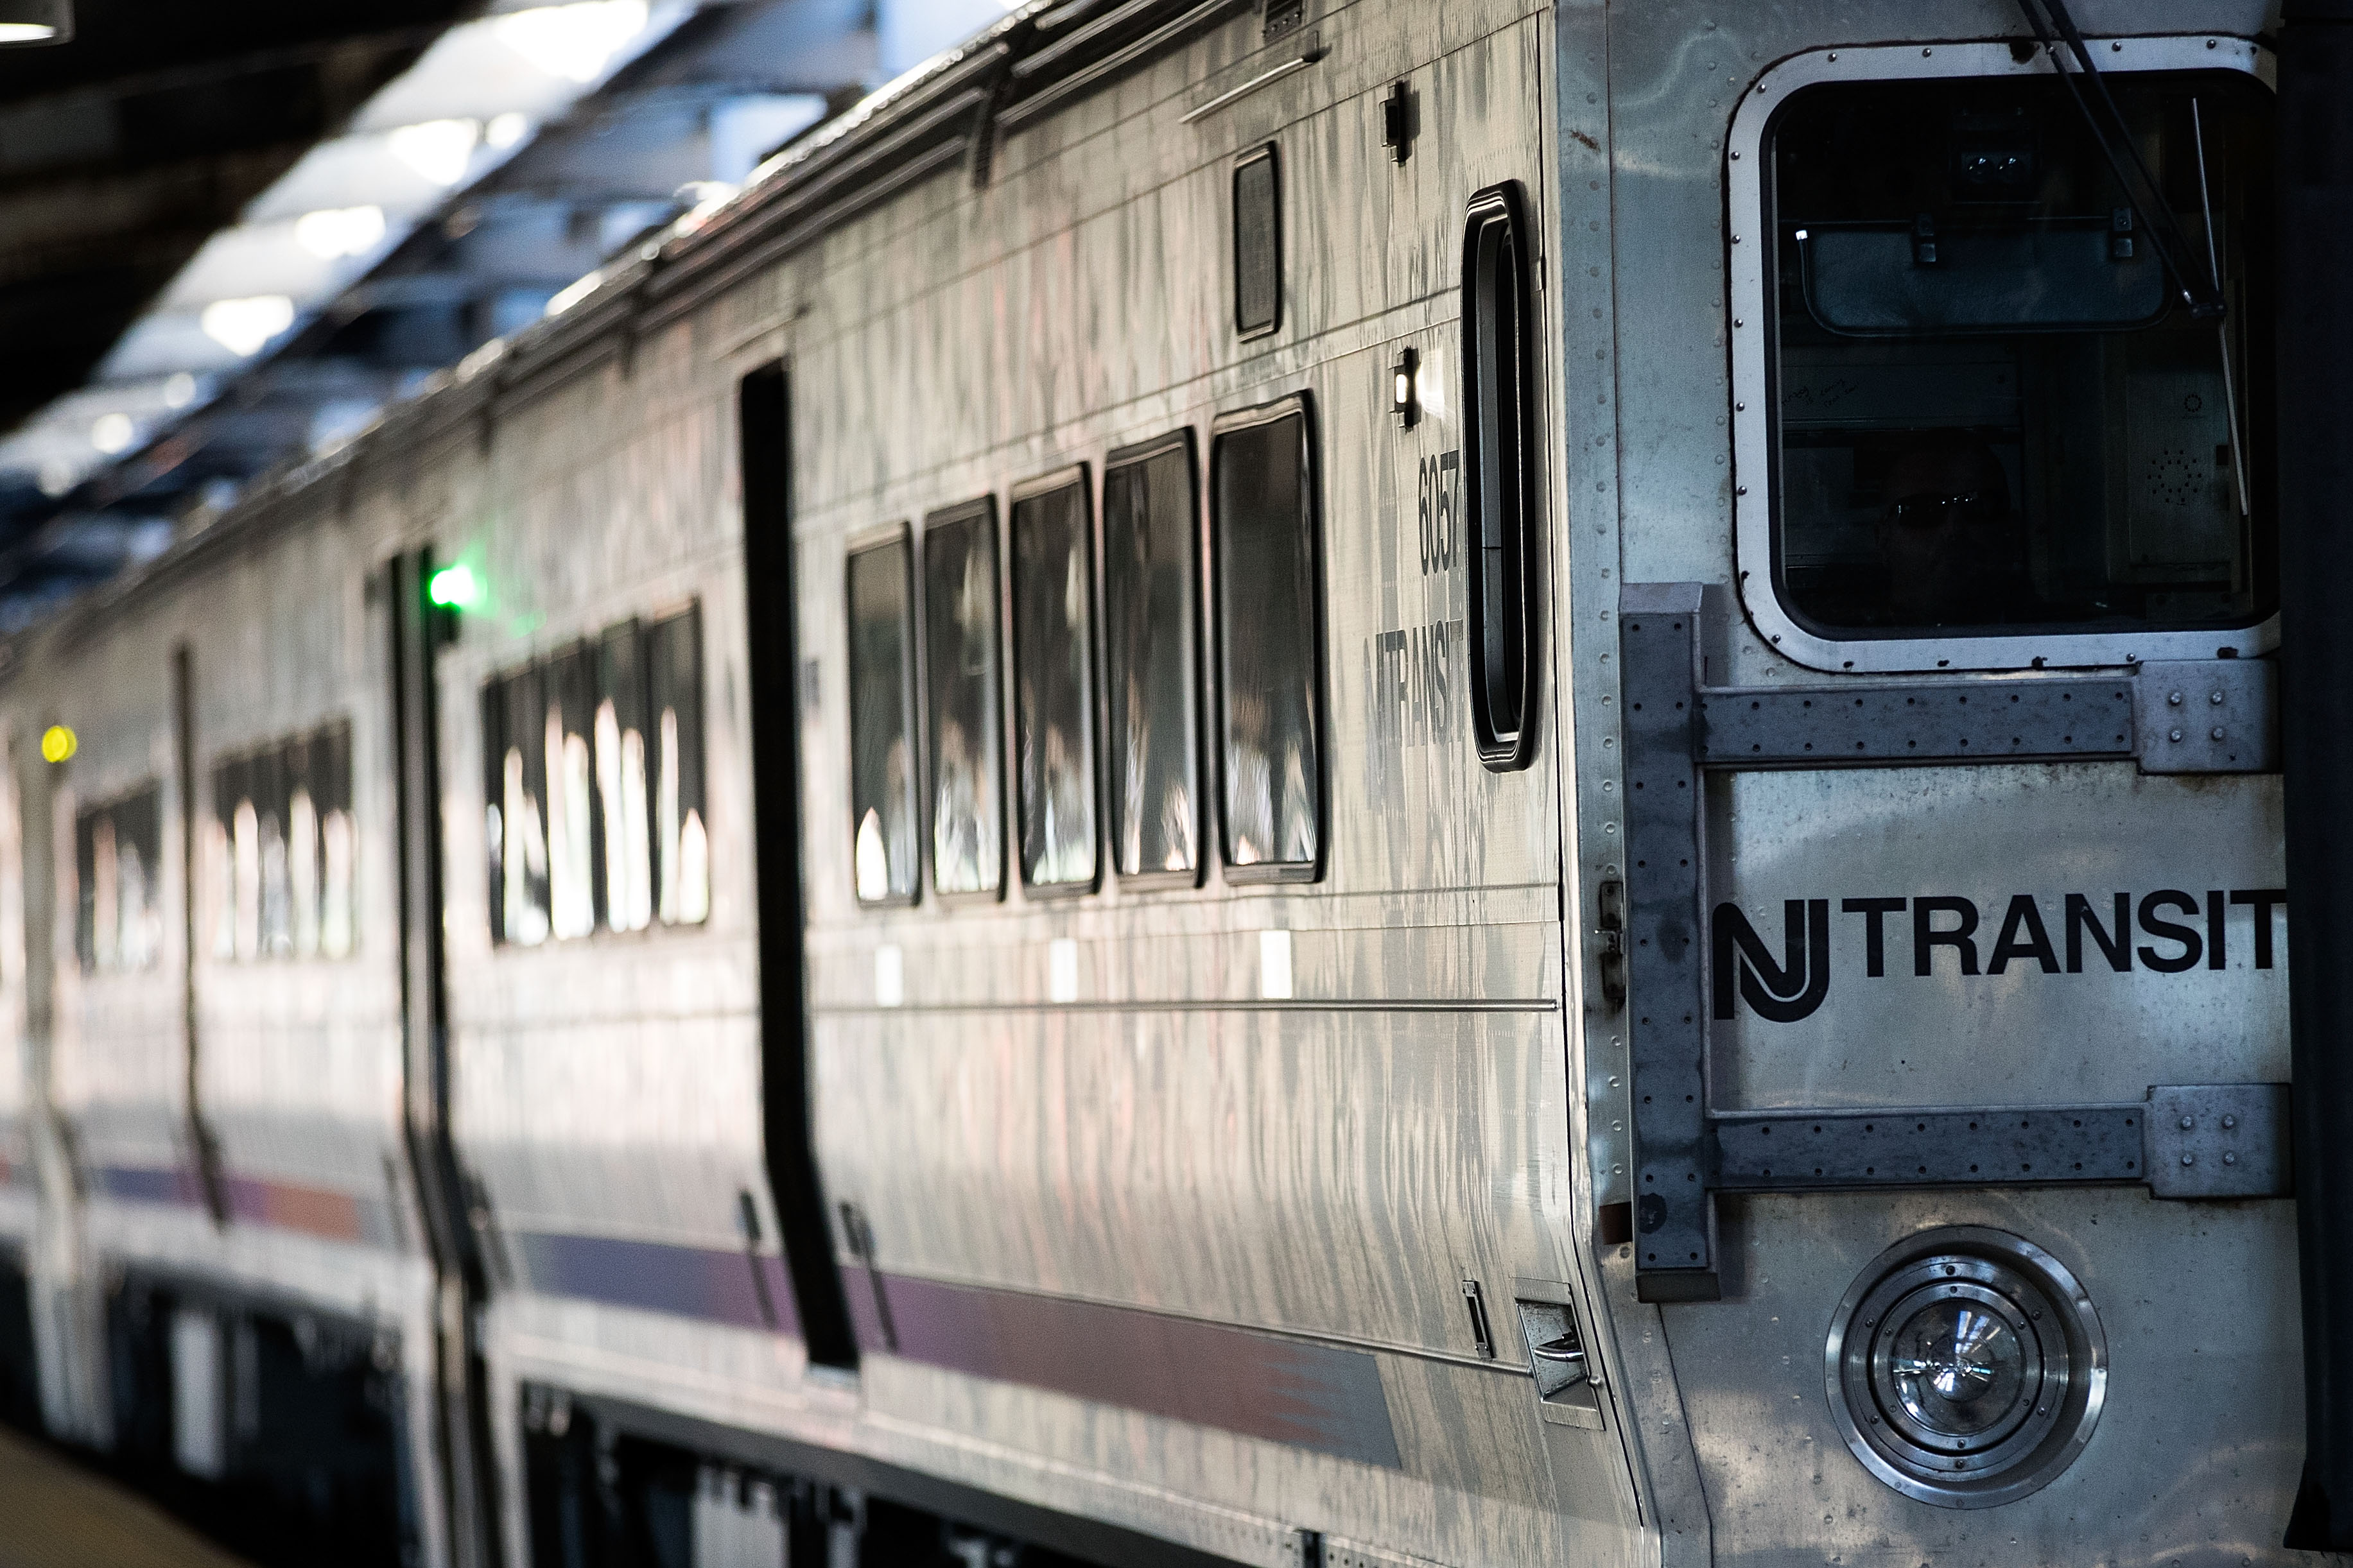 Possible LIRR Strike Puts Focus on Crowded 7 Trains at Mets